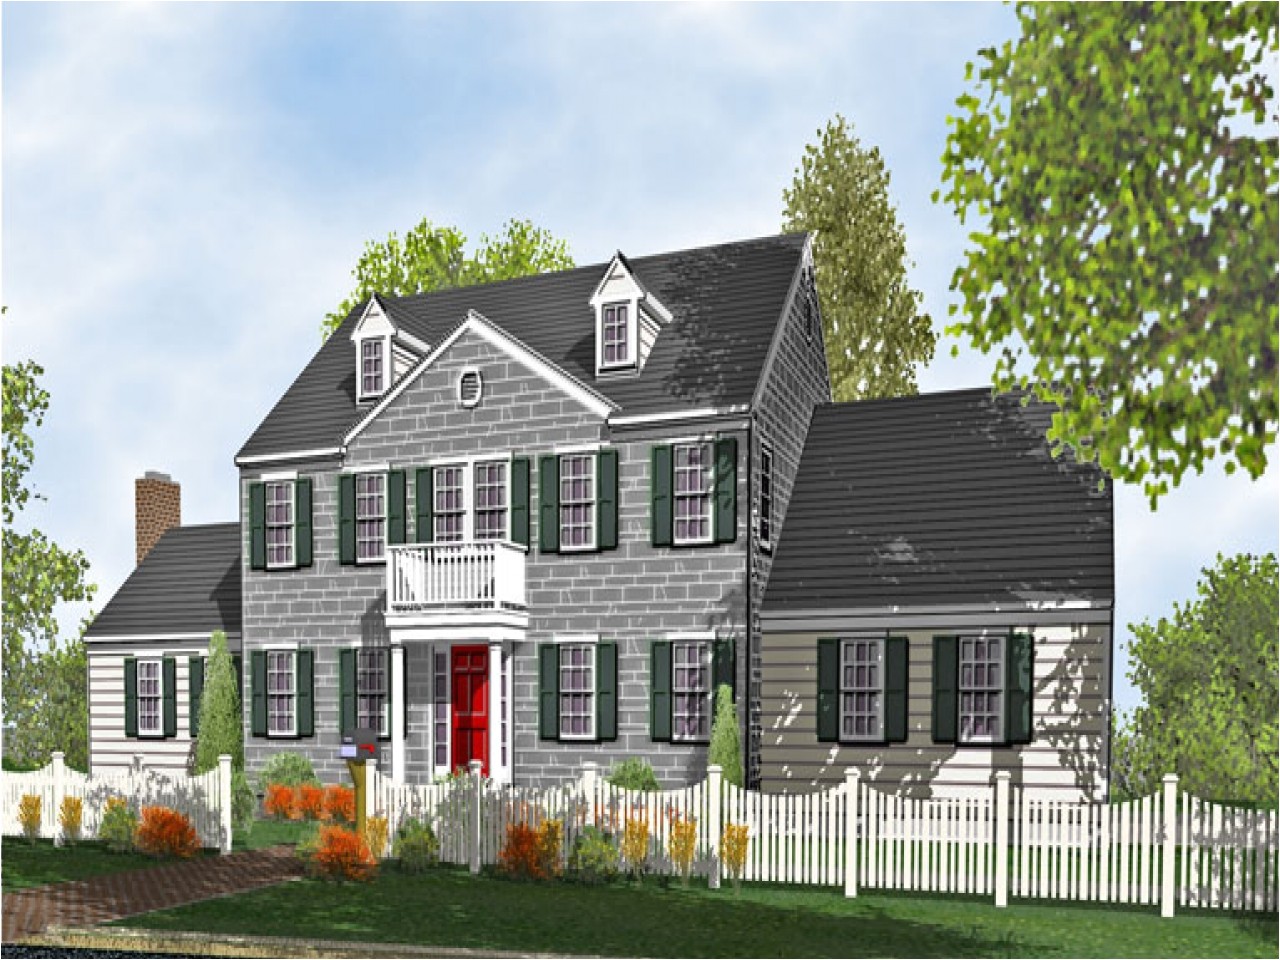 a43b34d6559a025d colonial style homes colonial two story home plans for sale original home plans